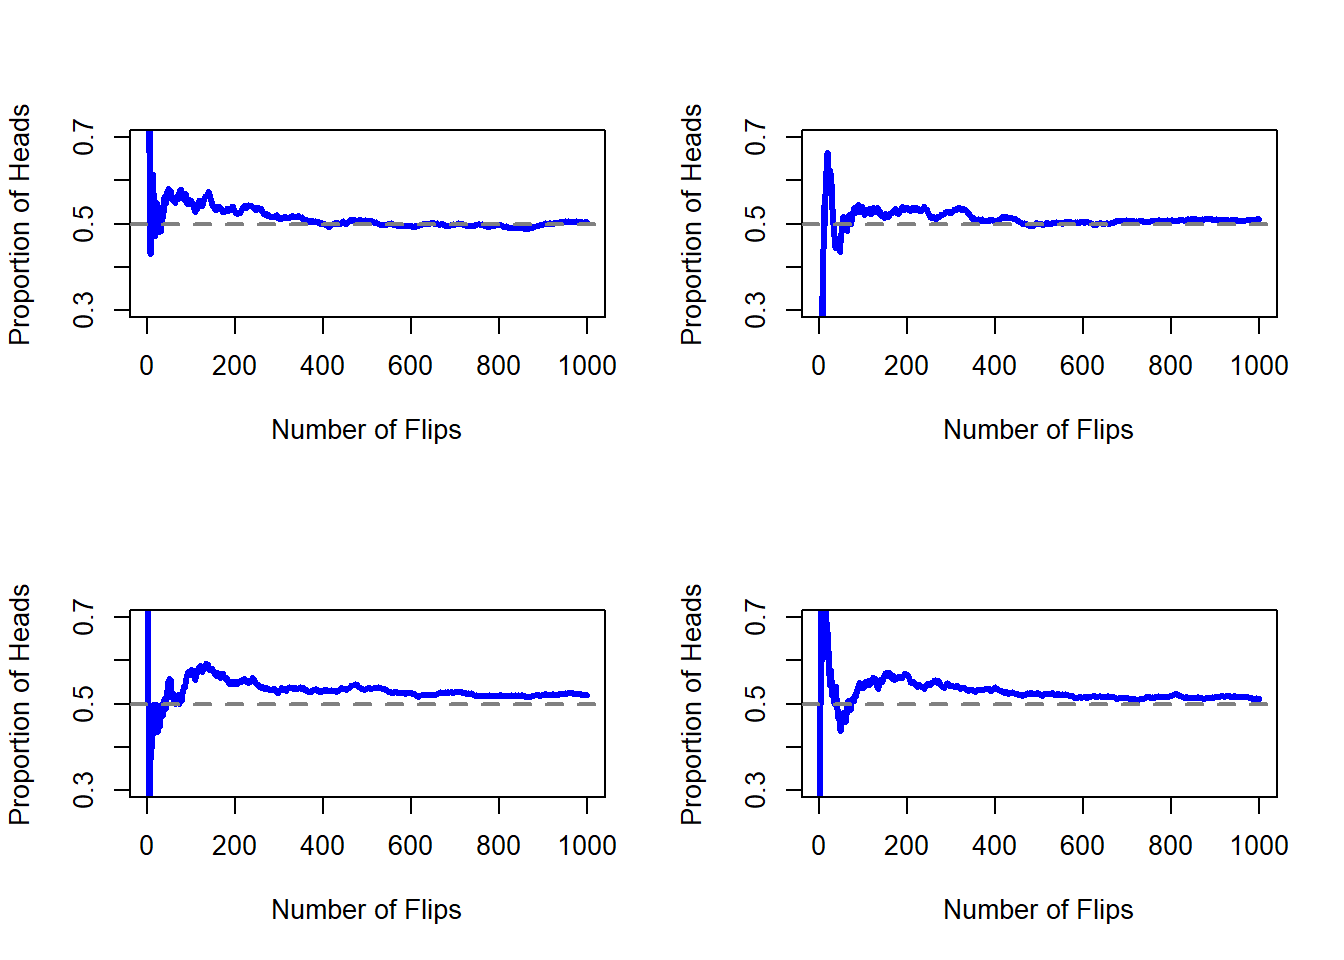 An illustration of how frequentist probability works. If you flip a fair coin over and over again, the proportion of heads that you've seen eventually settles down, and converges to the true probability of 0.5. Each panel shows four different simulated experiments: in each case, we pretend we flipped a coin 1000 times, and kept track of the proportion of flips that were heads as we went along. Although none of these sequences actually ended up with an exact value of .5, if we'd extended the experiment for an infinite number of coin flips they would have.